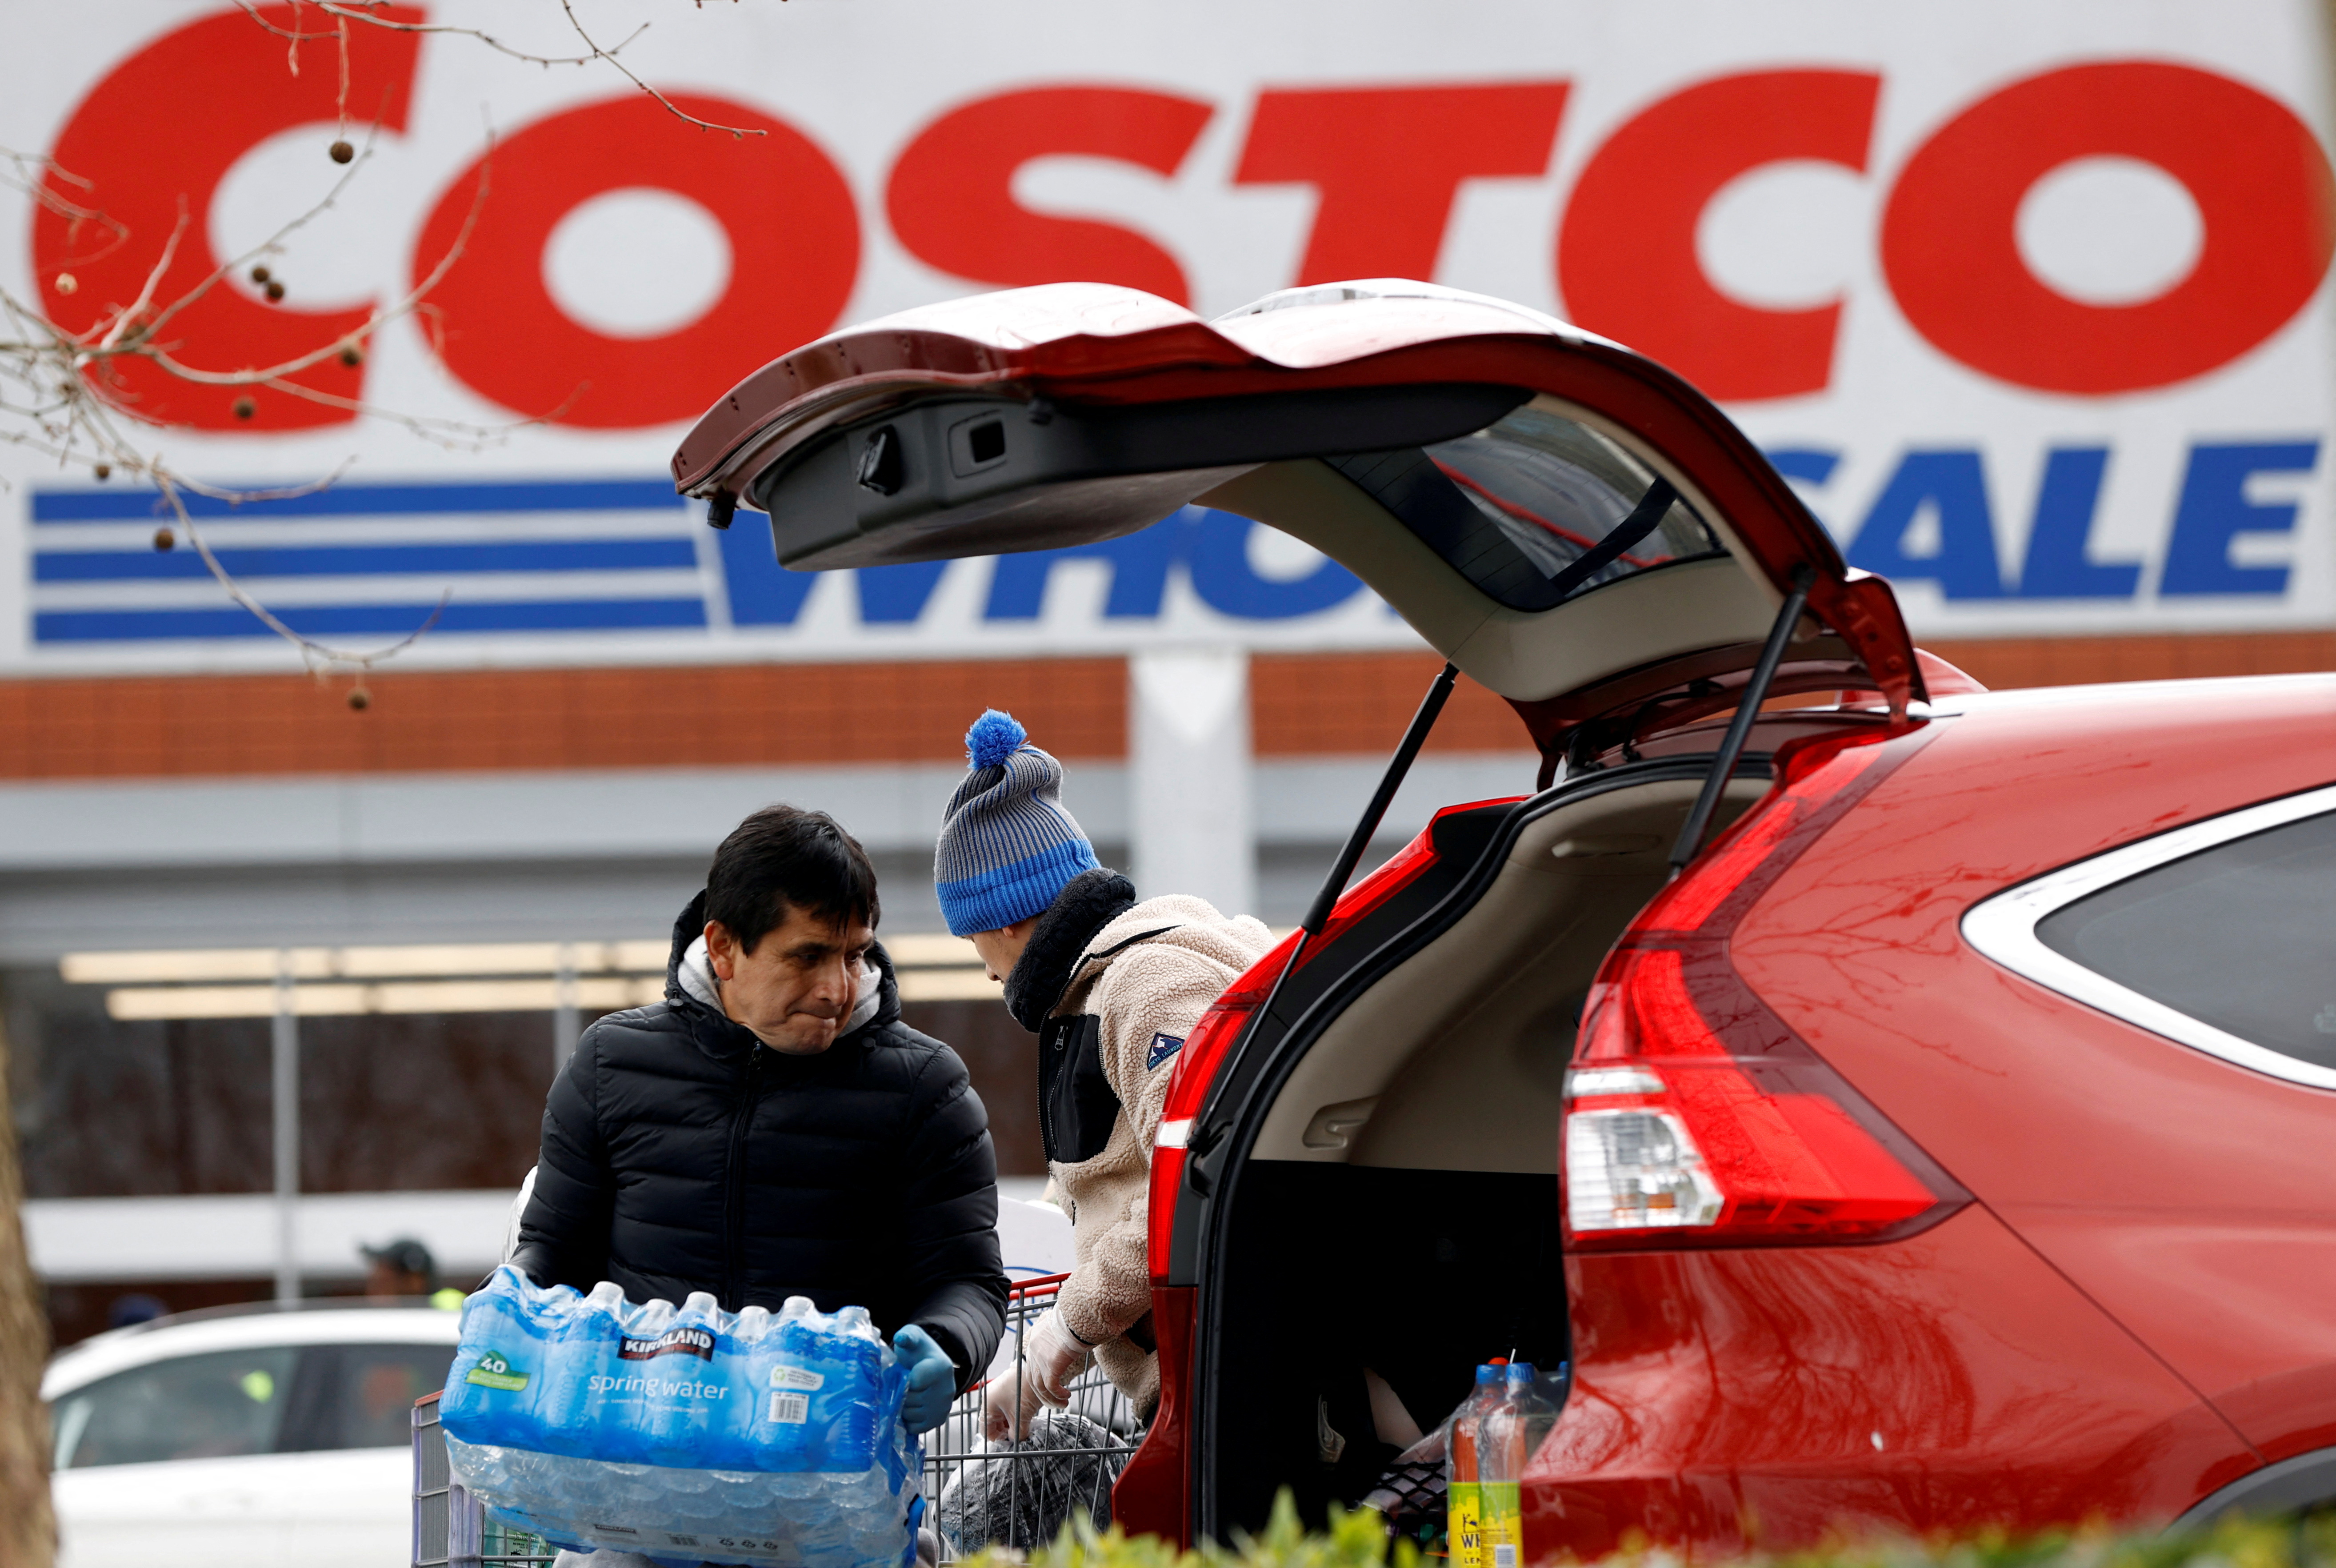 A shopper loads a car with bottled water at a Costco Wholesalers in Chingford